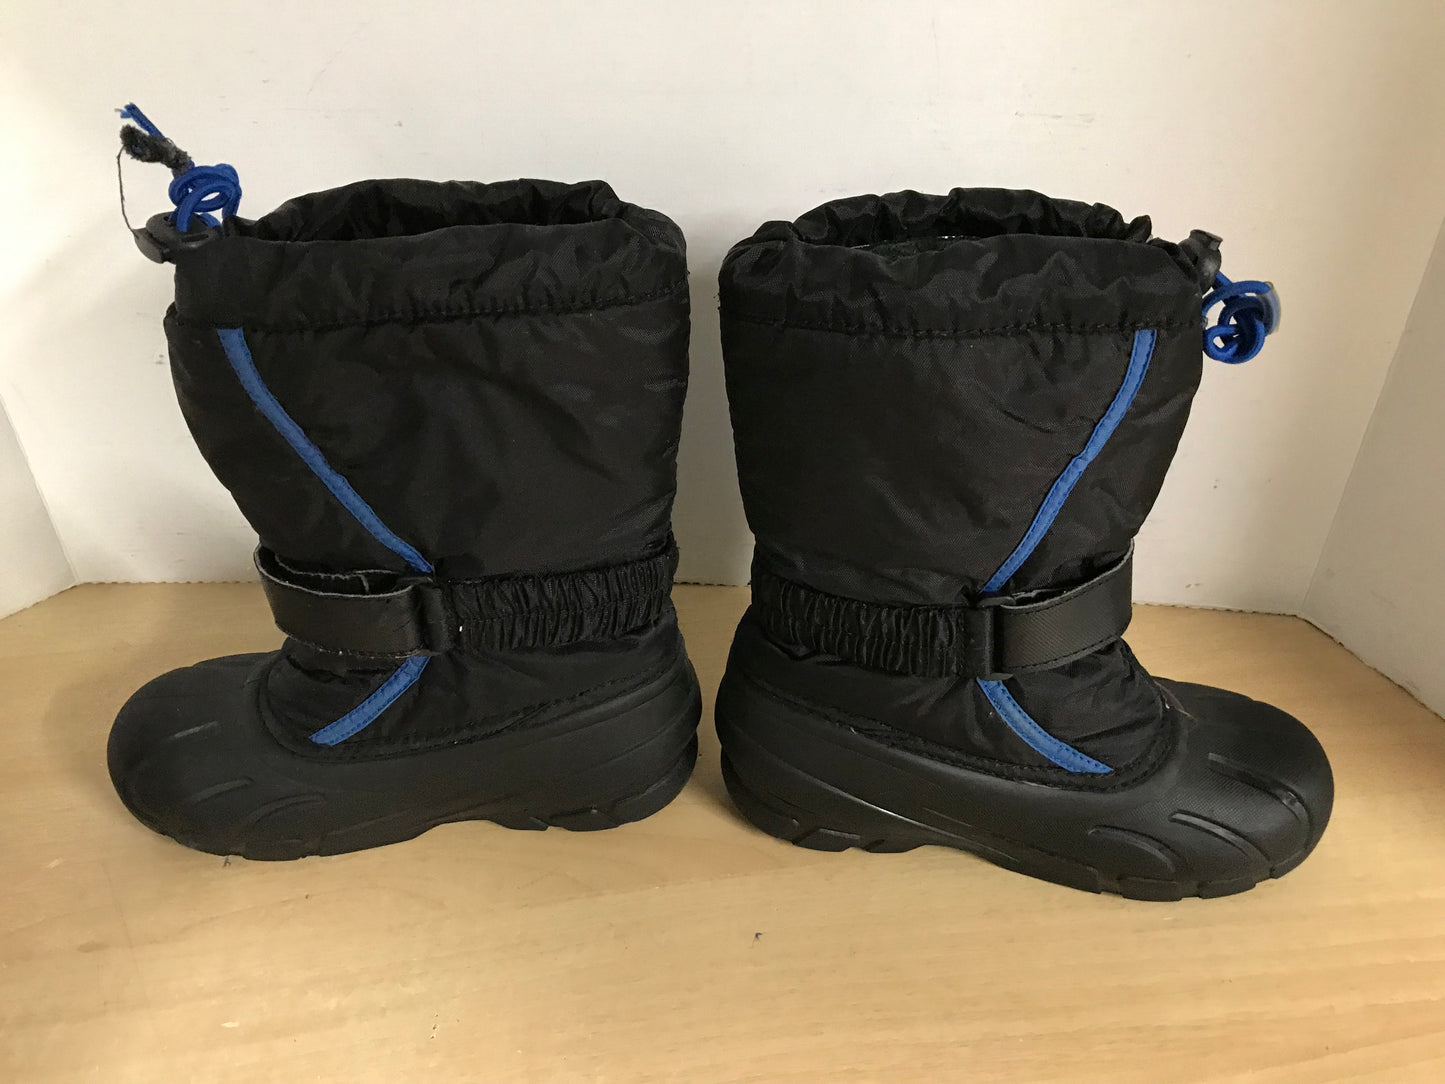 Winter Boots Child Size 1 Sorel Blue and Black With Liners